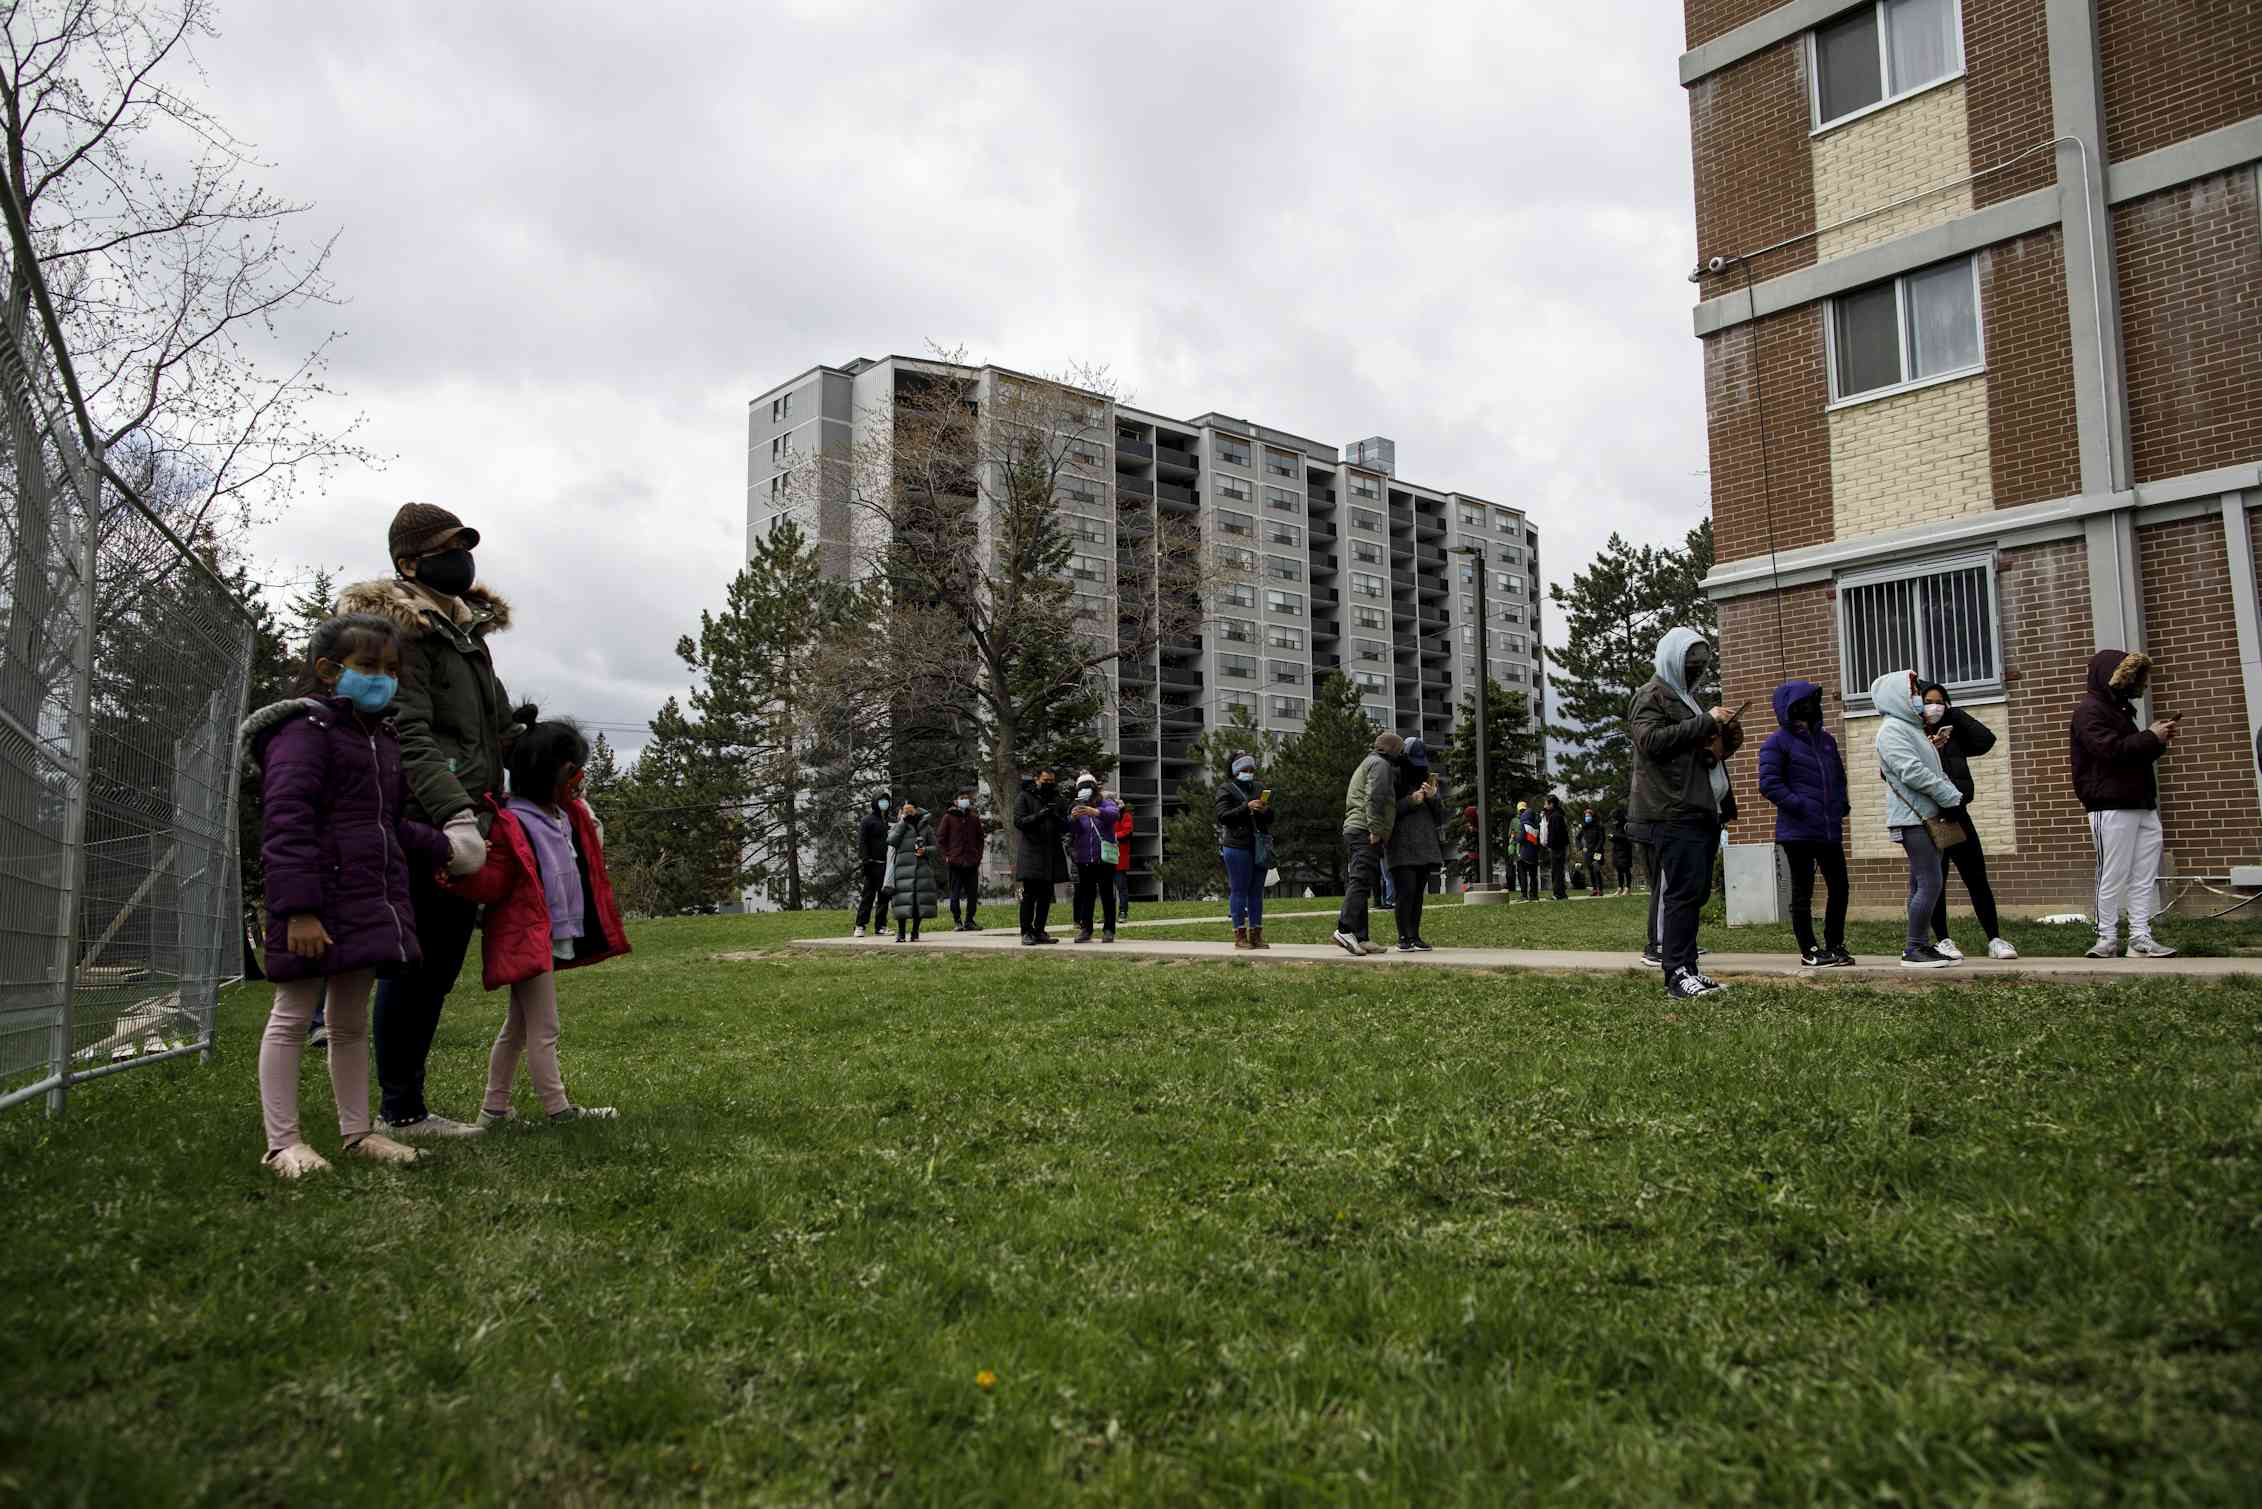 People seen lining up outside an apartment building.